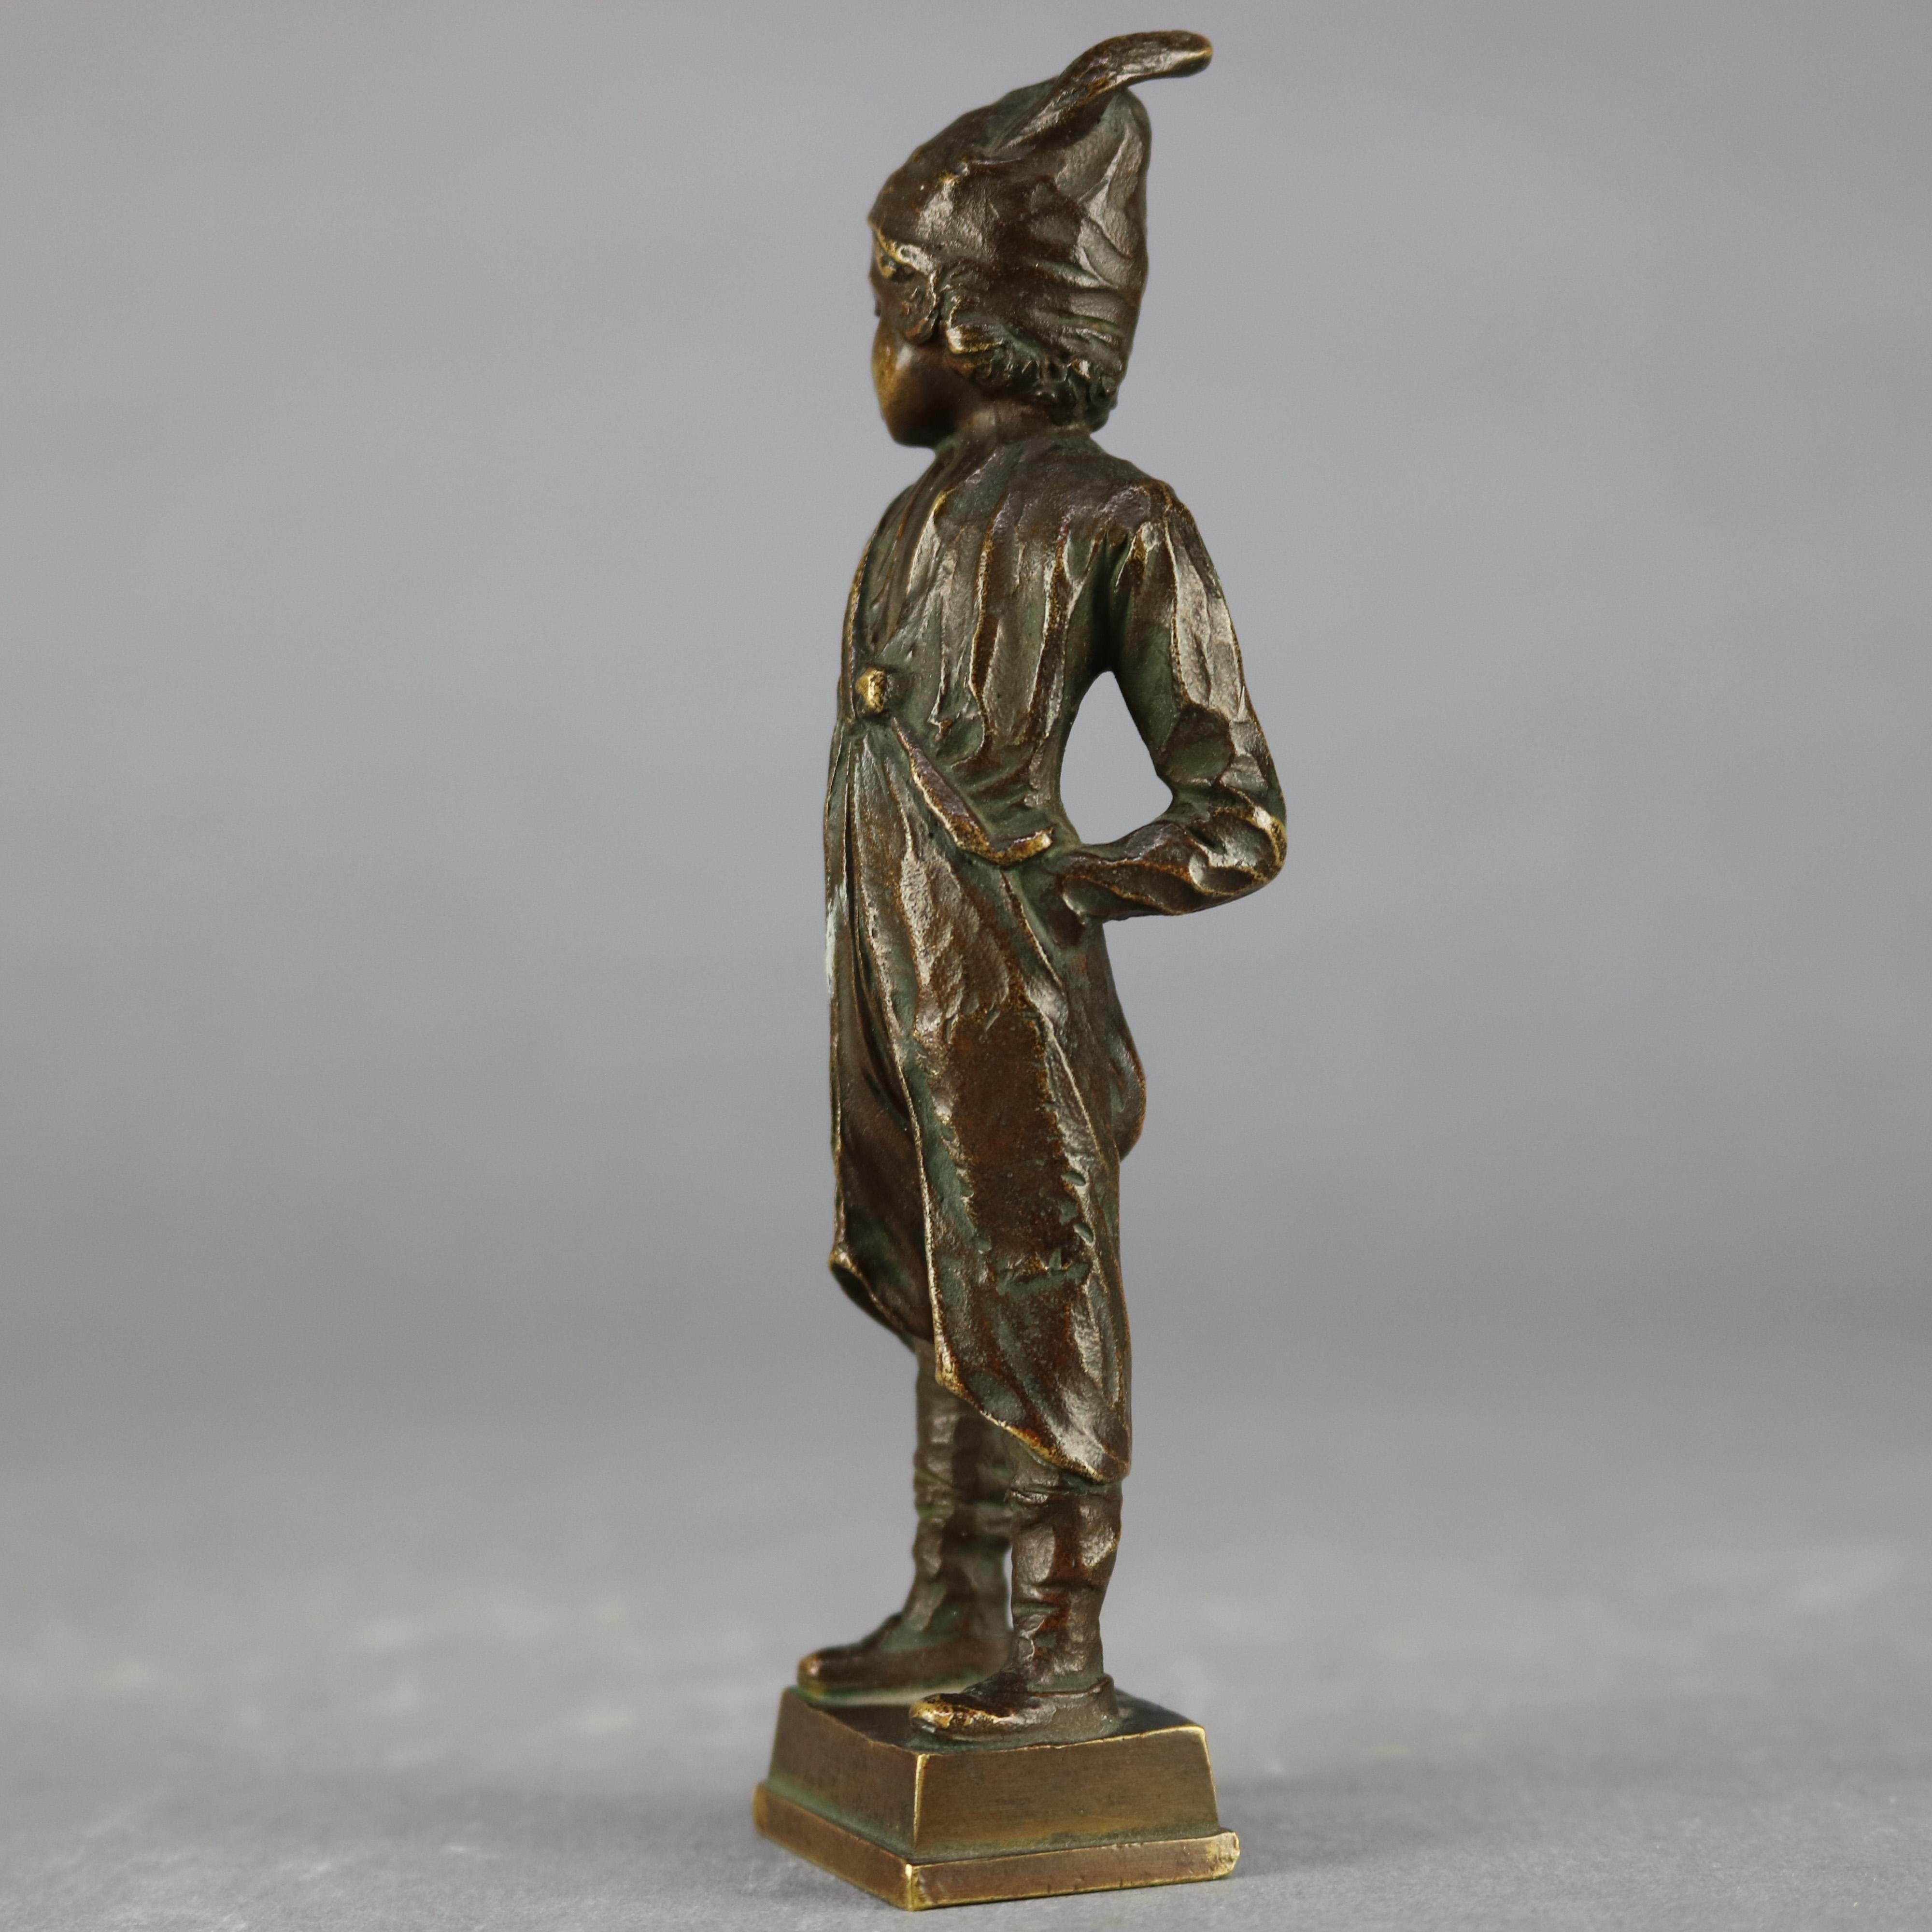 An antique Continental figural cabinet sculpture offers cast bronze construction and depicts young boy, signed Beck on plinth as photographed, circa 1900.

Measures: 5